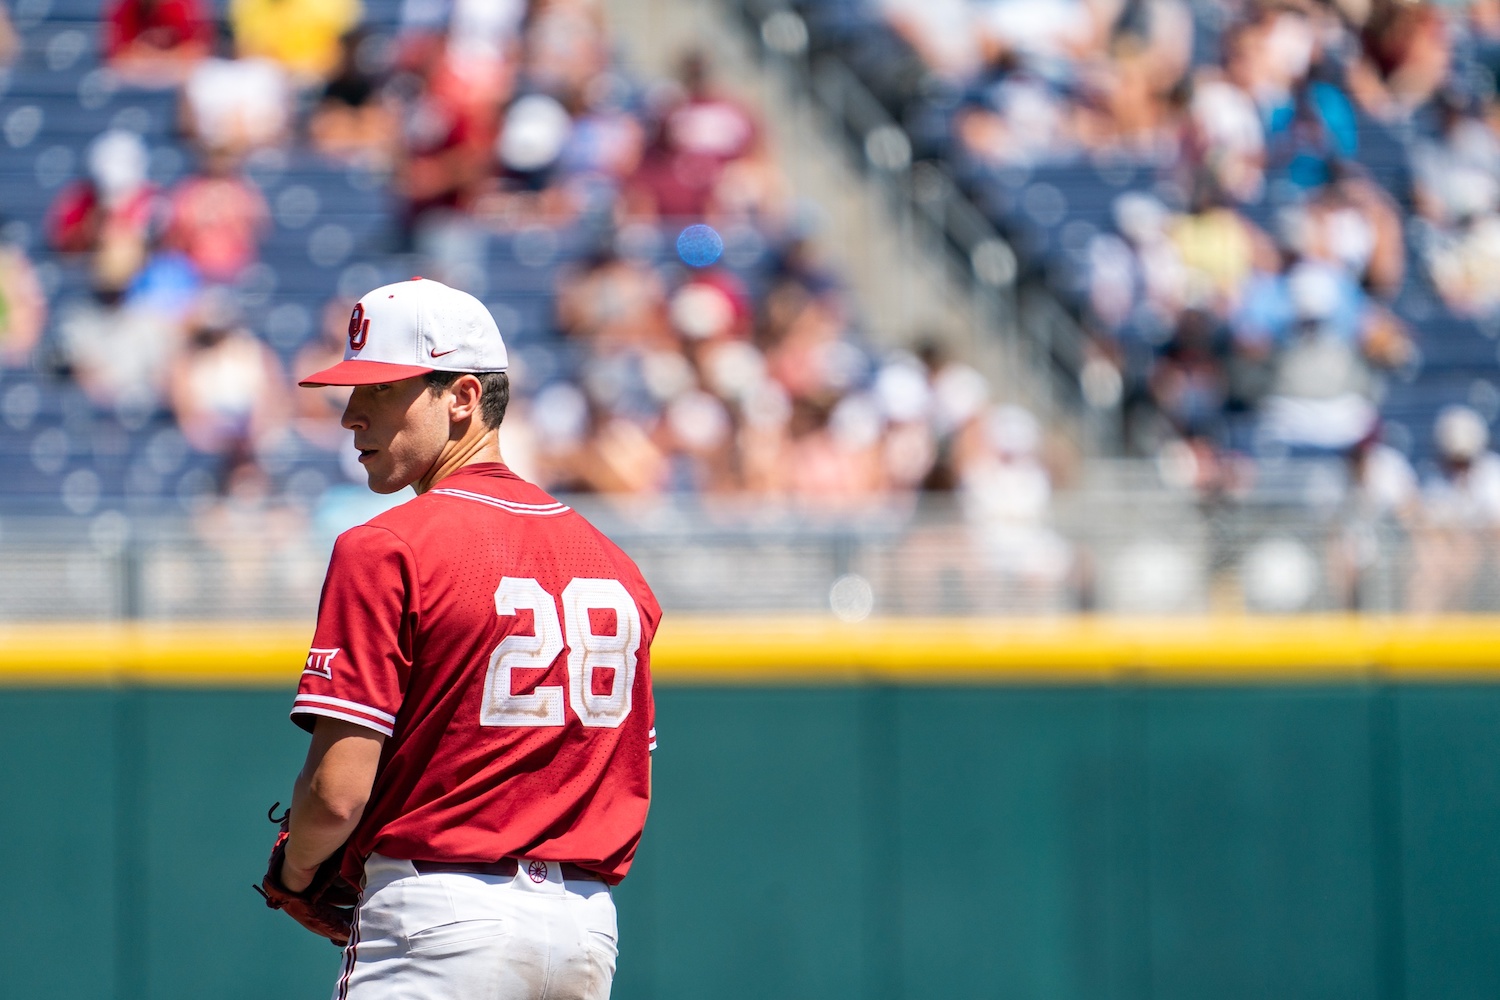 Jun 22, 2022; Omaha, NE, USA; Oklahoma Sooners starting pitcher David Sandlin (28) pitches against the Texas A&M Aggies during the seventh inning at Charles Schwab Field. Mandatory Credit: Dylan Widger-USA TODAY Sports